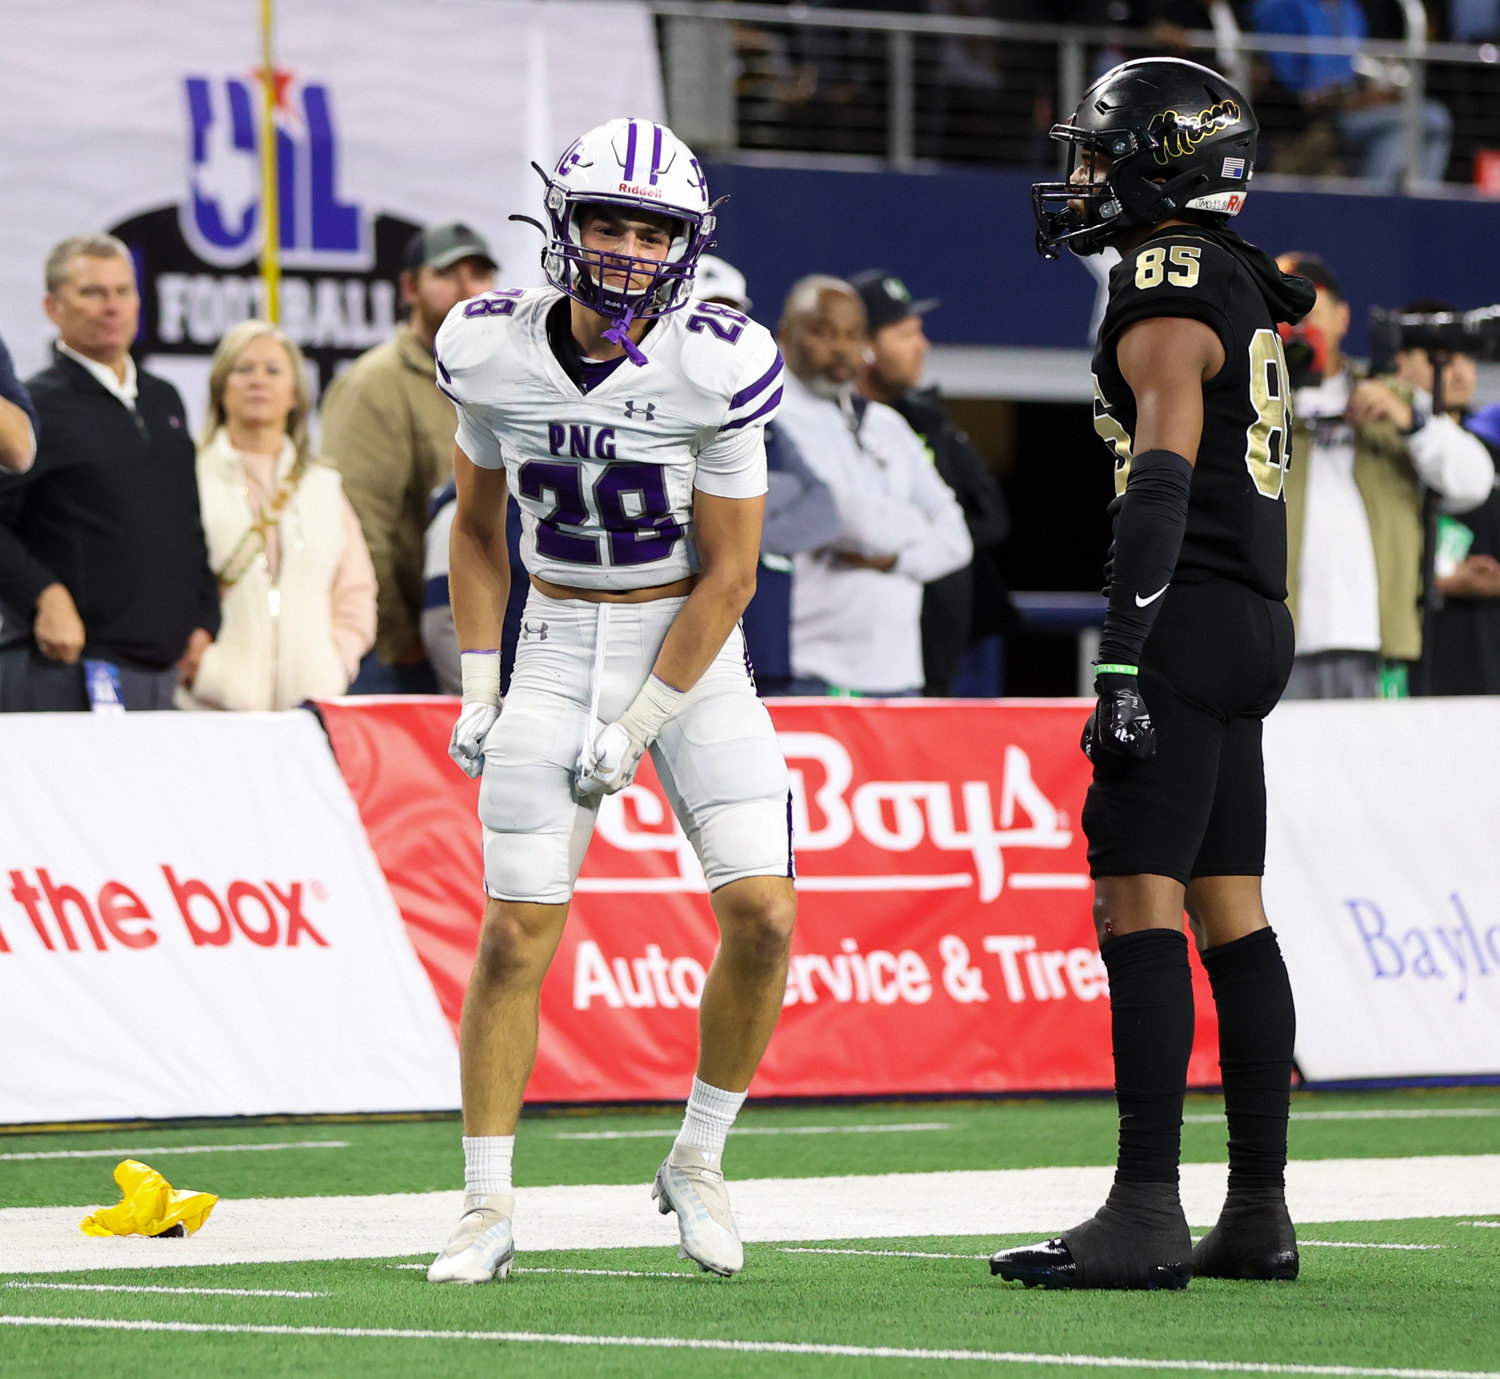 Port Neches-Groves defensive back Reid Richard (28) reacts after being flagged for pass interference during the Class 5A Division II football state championship game between South Oak Cliff and Port Neches-Groves in Arlington, Texas, on Dec. 16, 2022.